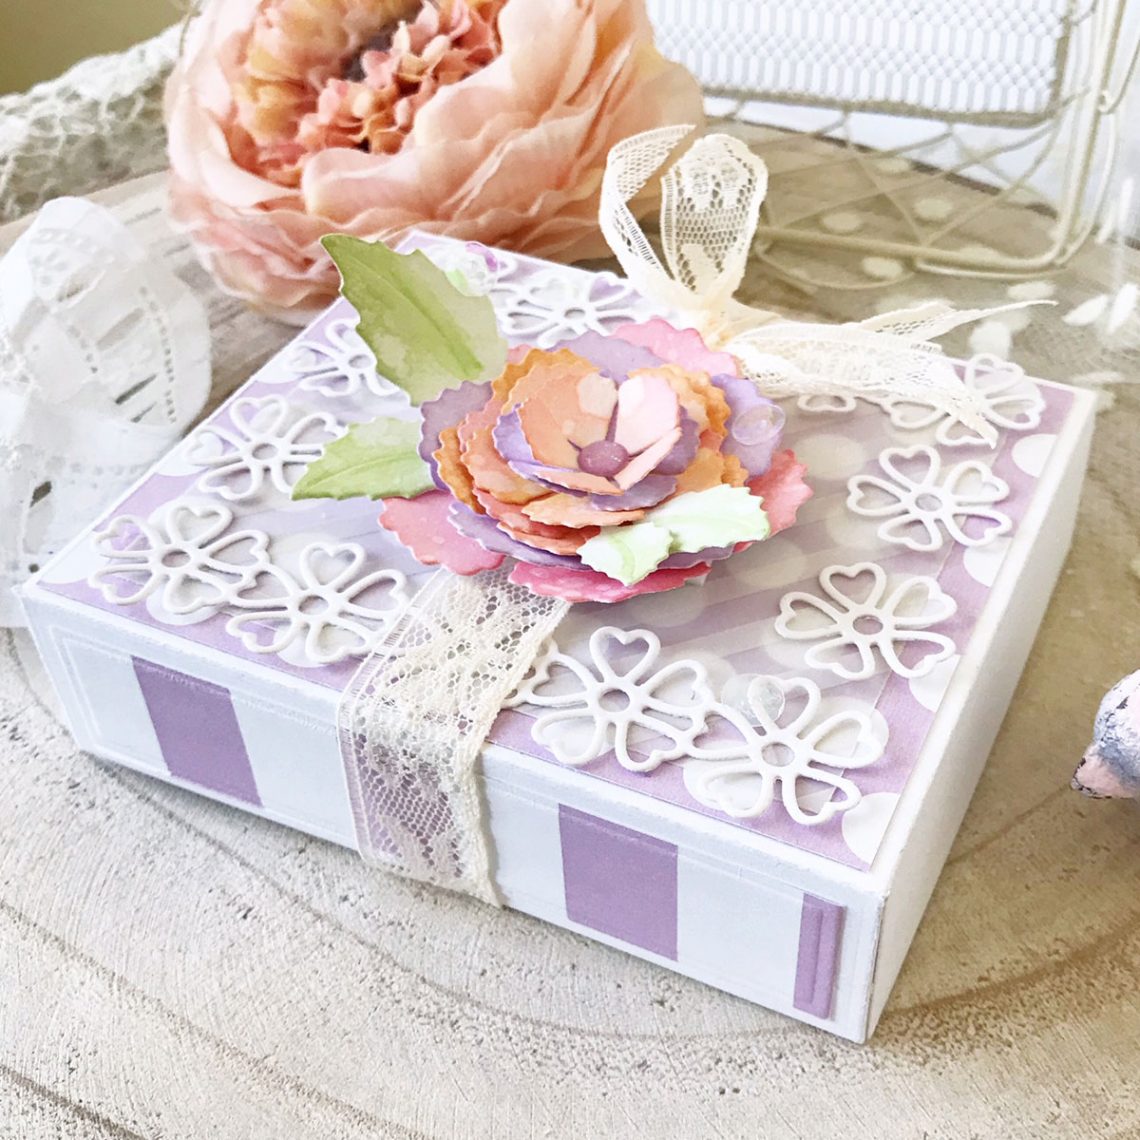 Blooming Garden Collection by Marisa Job - Inspiration | Floral Box by Melissa Phillips for Spellbinders using S4-916 Blooming Rose, S6-146 Heart Flower Box. #spellbinders #neverstopmaking #diecutting #giftbox